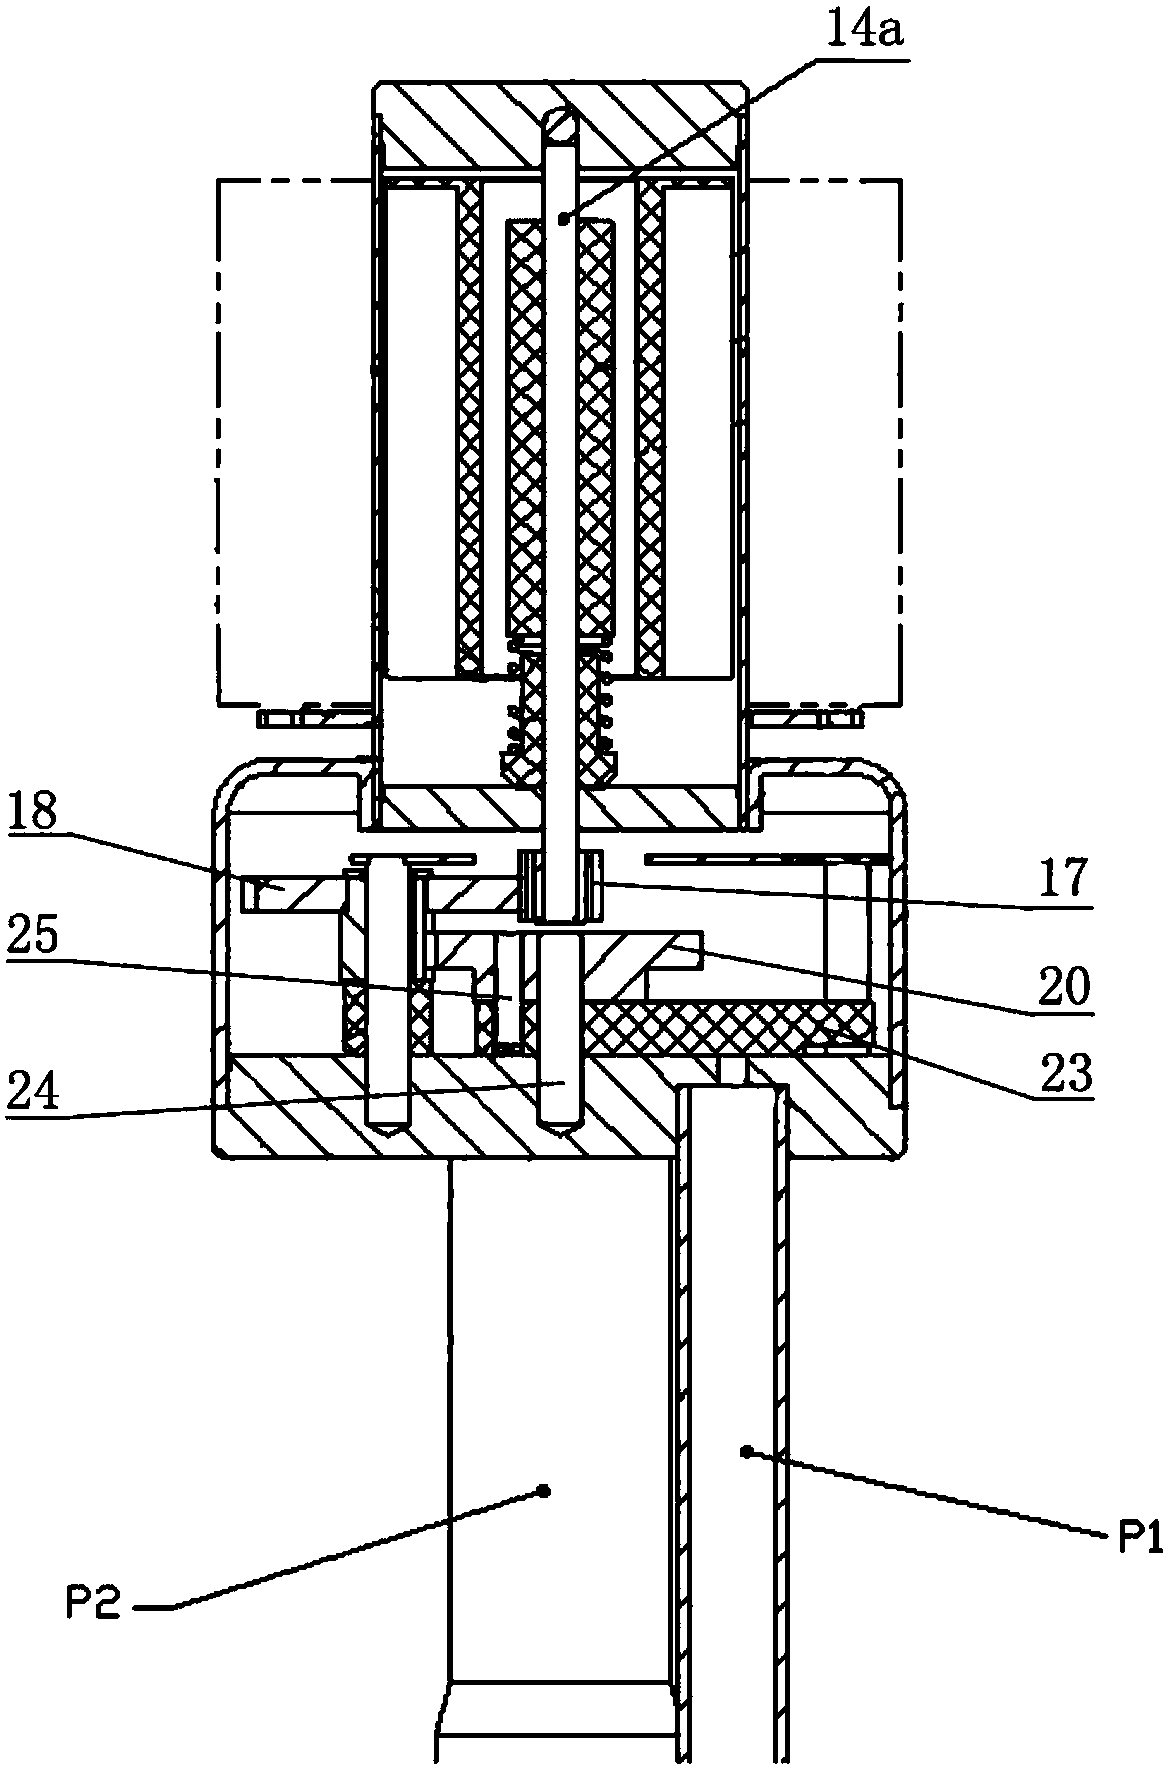 Electric tee valve and refrigeration equipment